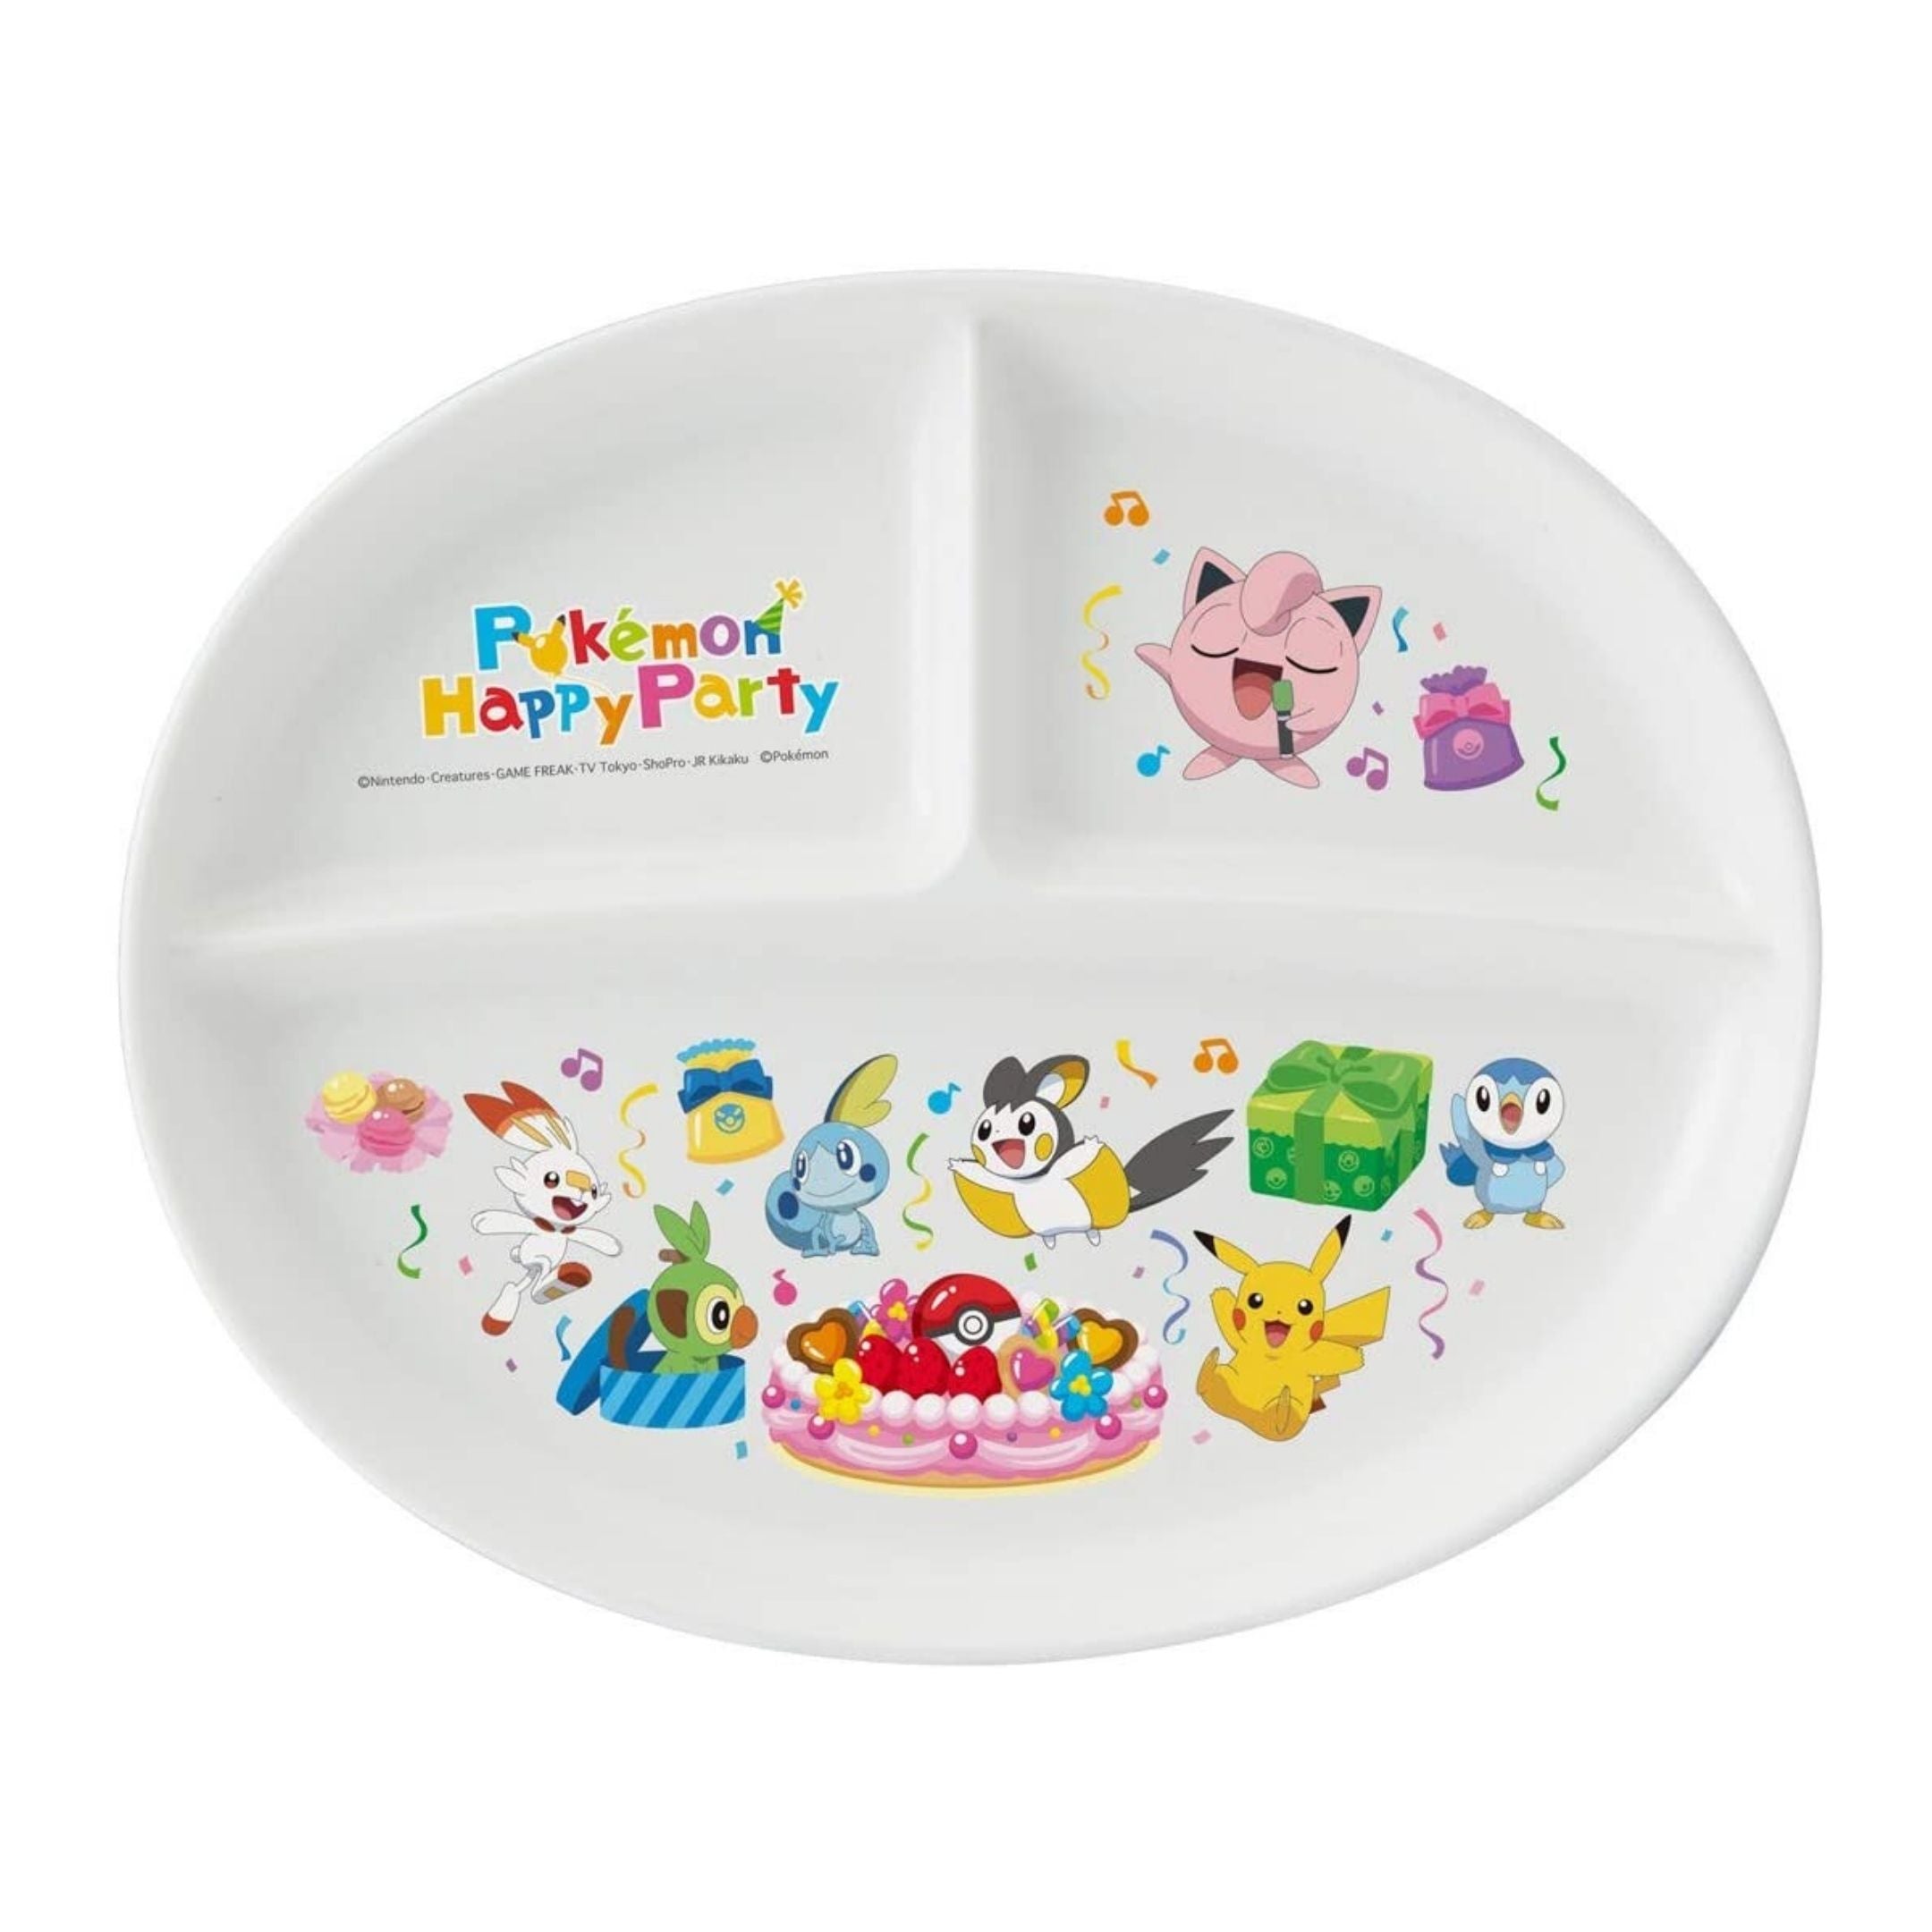 Pokémon Happy Party Divided Plate